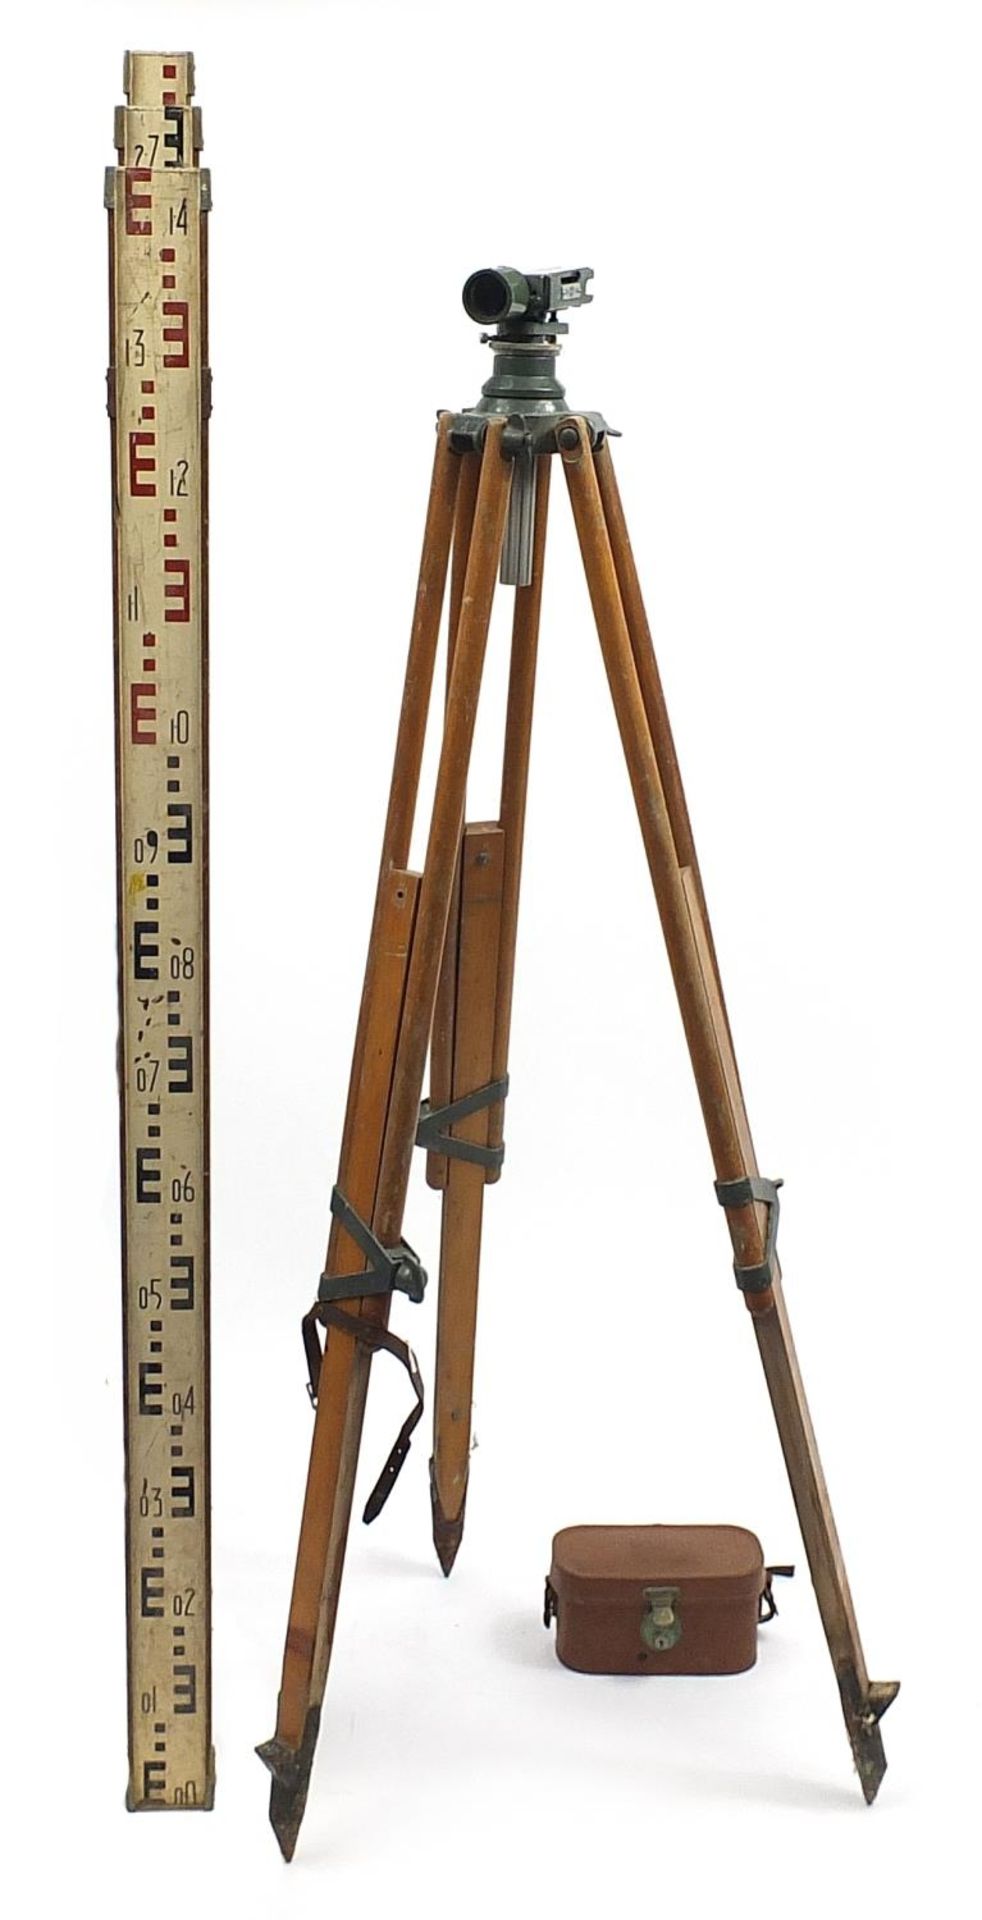 Hilger & Watts SL10-1 surveyor's level in leather case with tripod stand and measuring staff